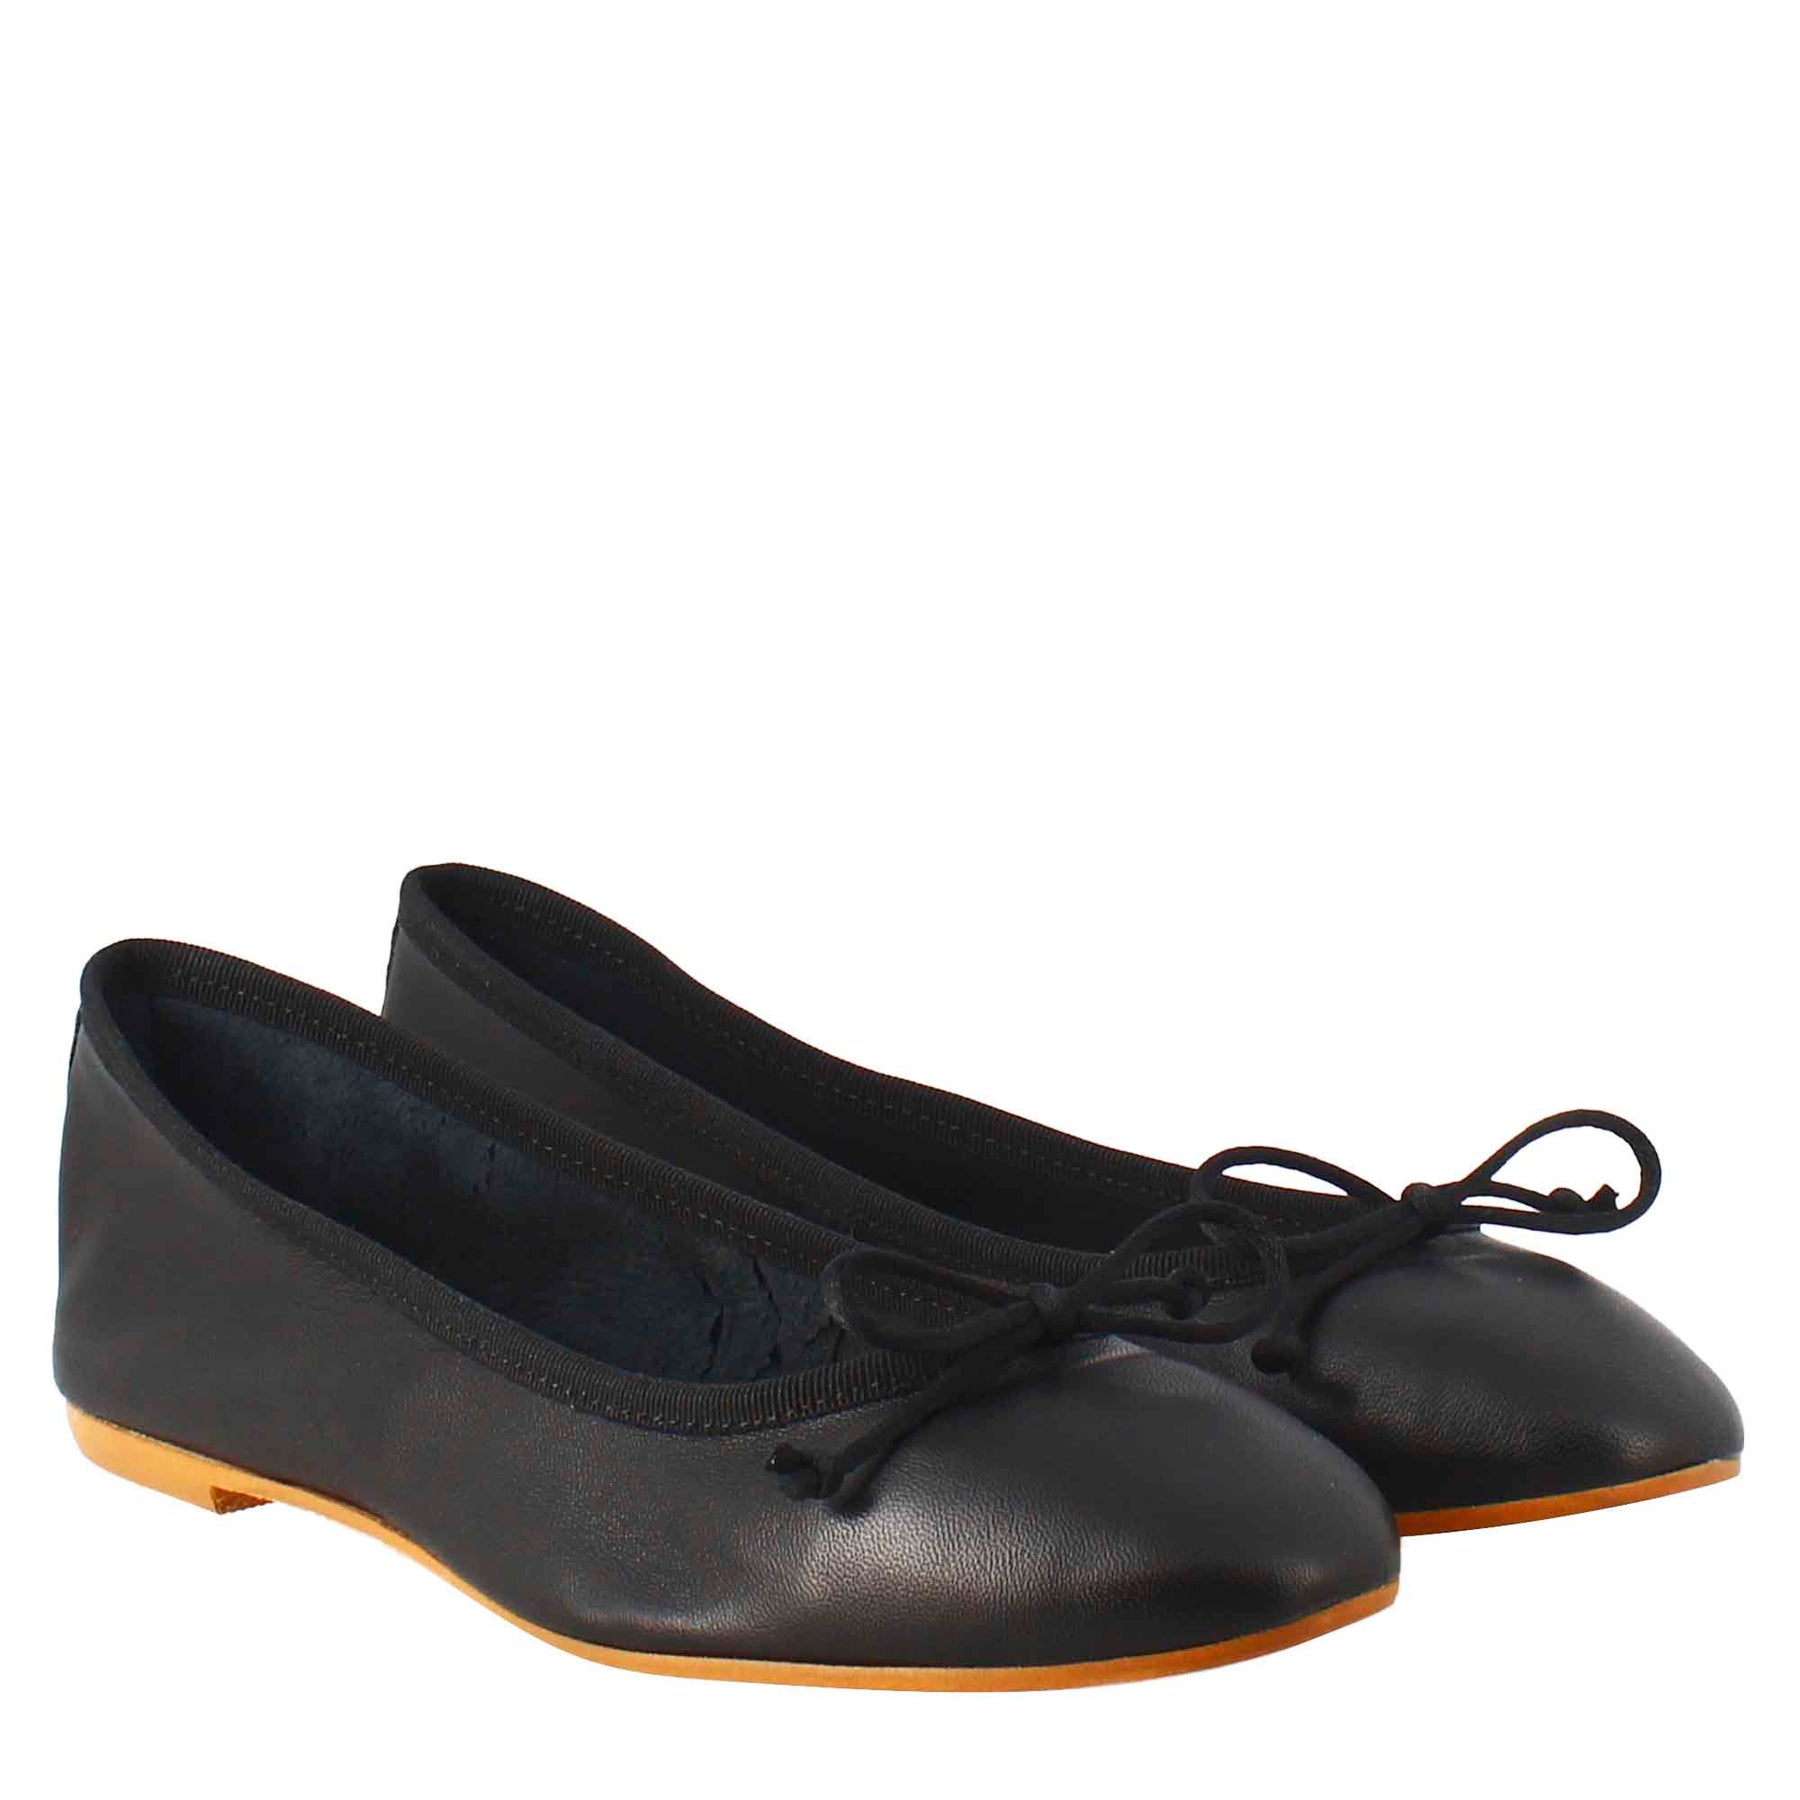 Light black women's ballet flats in smooth leather 